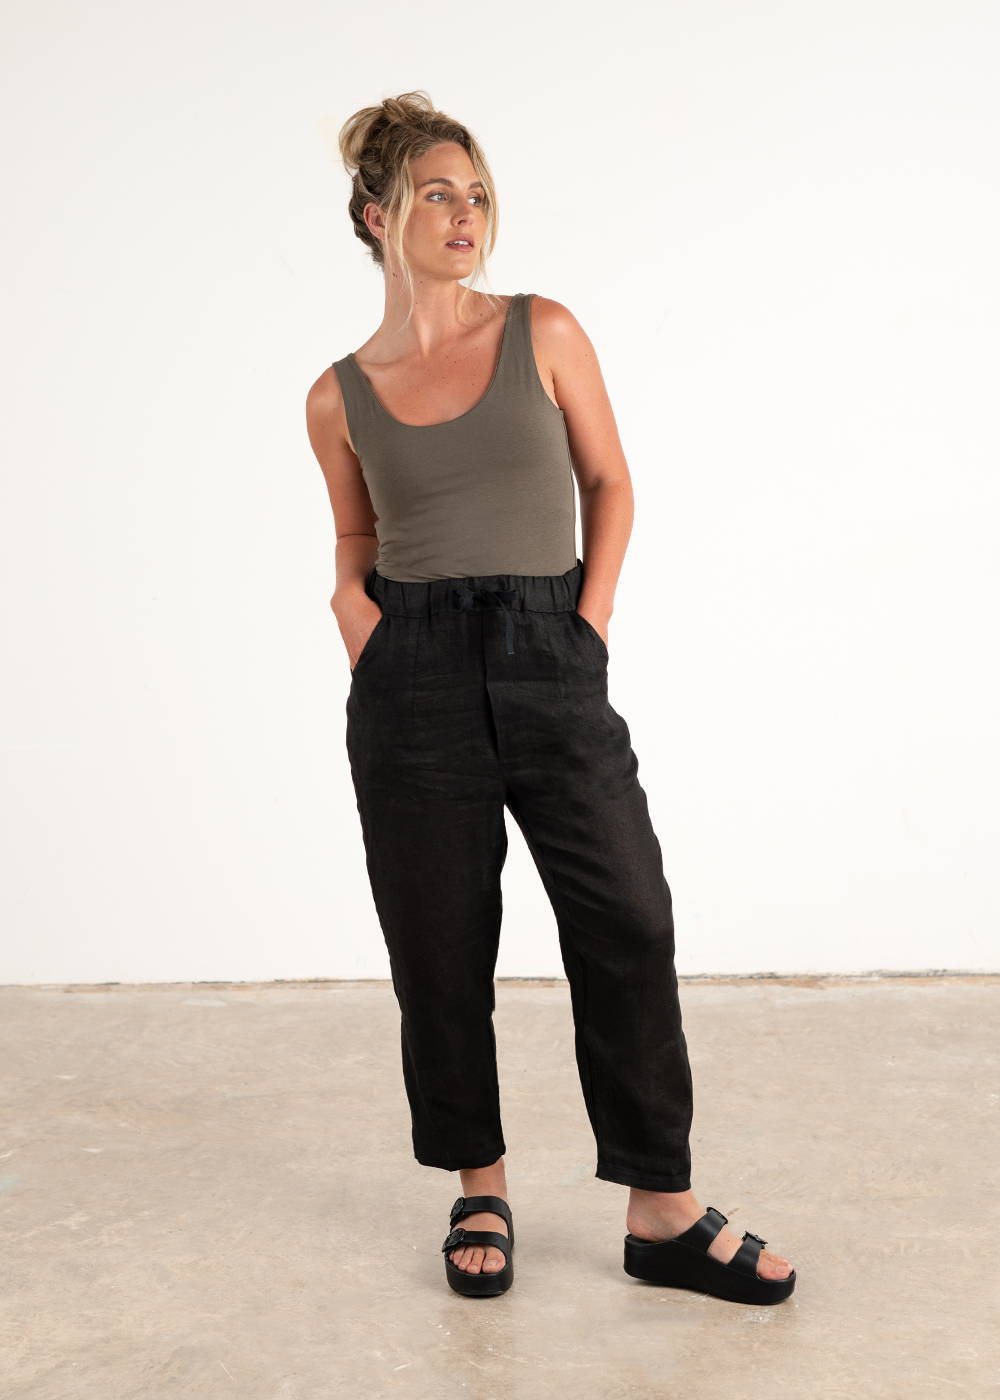 A model wearing a pair of black linen trousers with a khaki green vest and black chunky platform slides